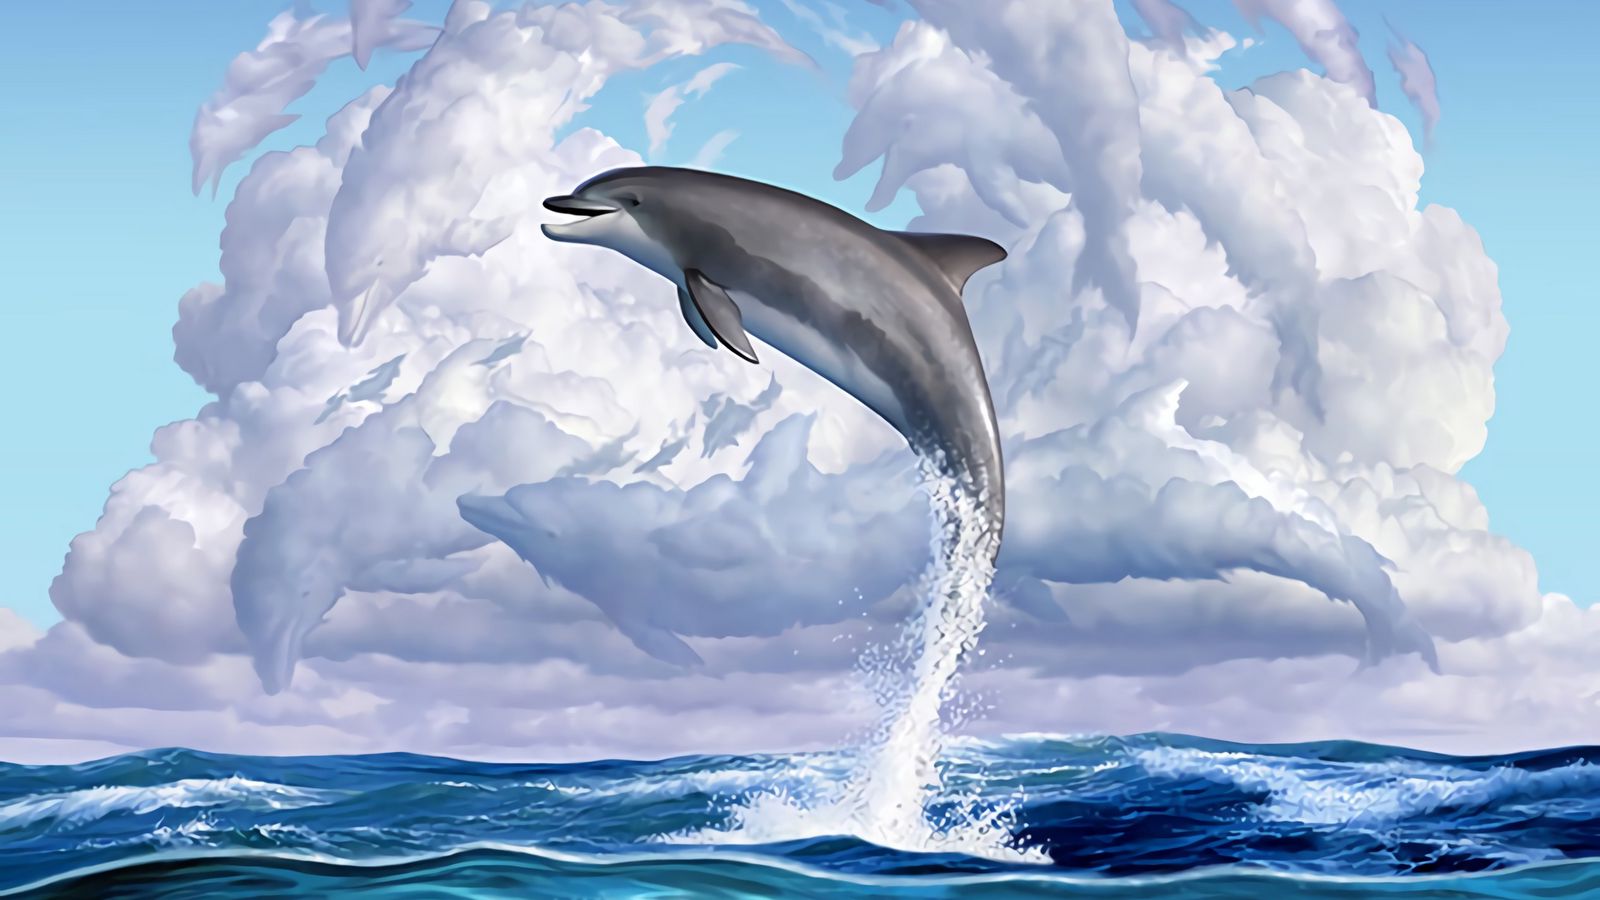 Dolphin Full HD, HDTV, 1080p 16:9 Wallpapers, HD Dolphin 1920x1080  Backgrounds, Free Images Download